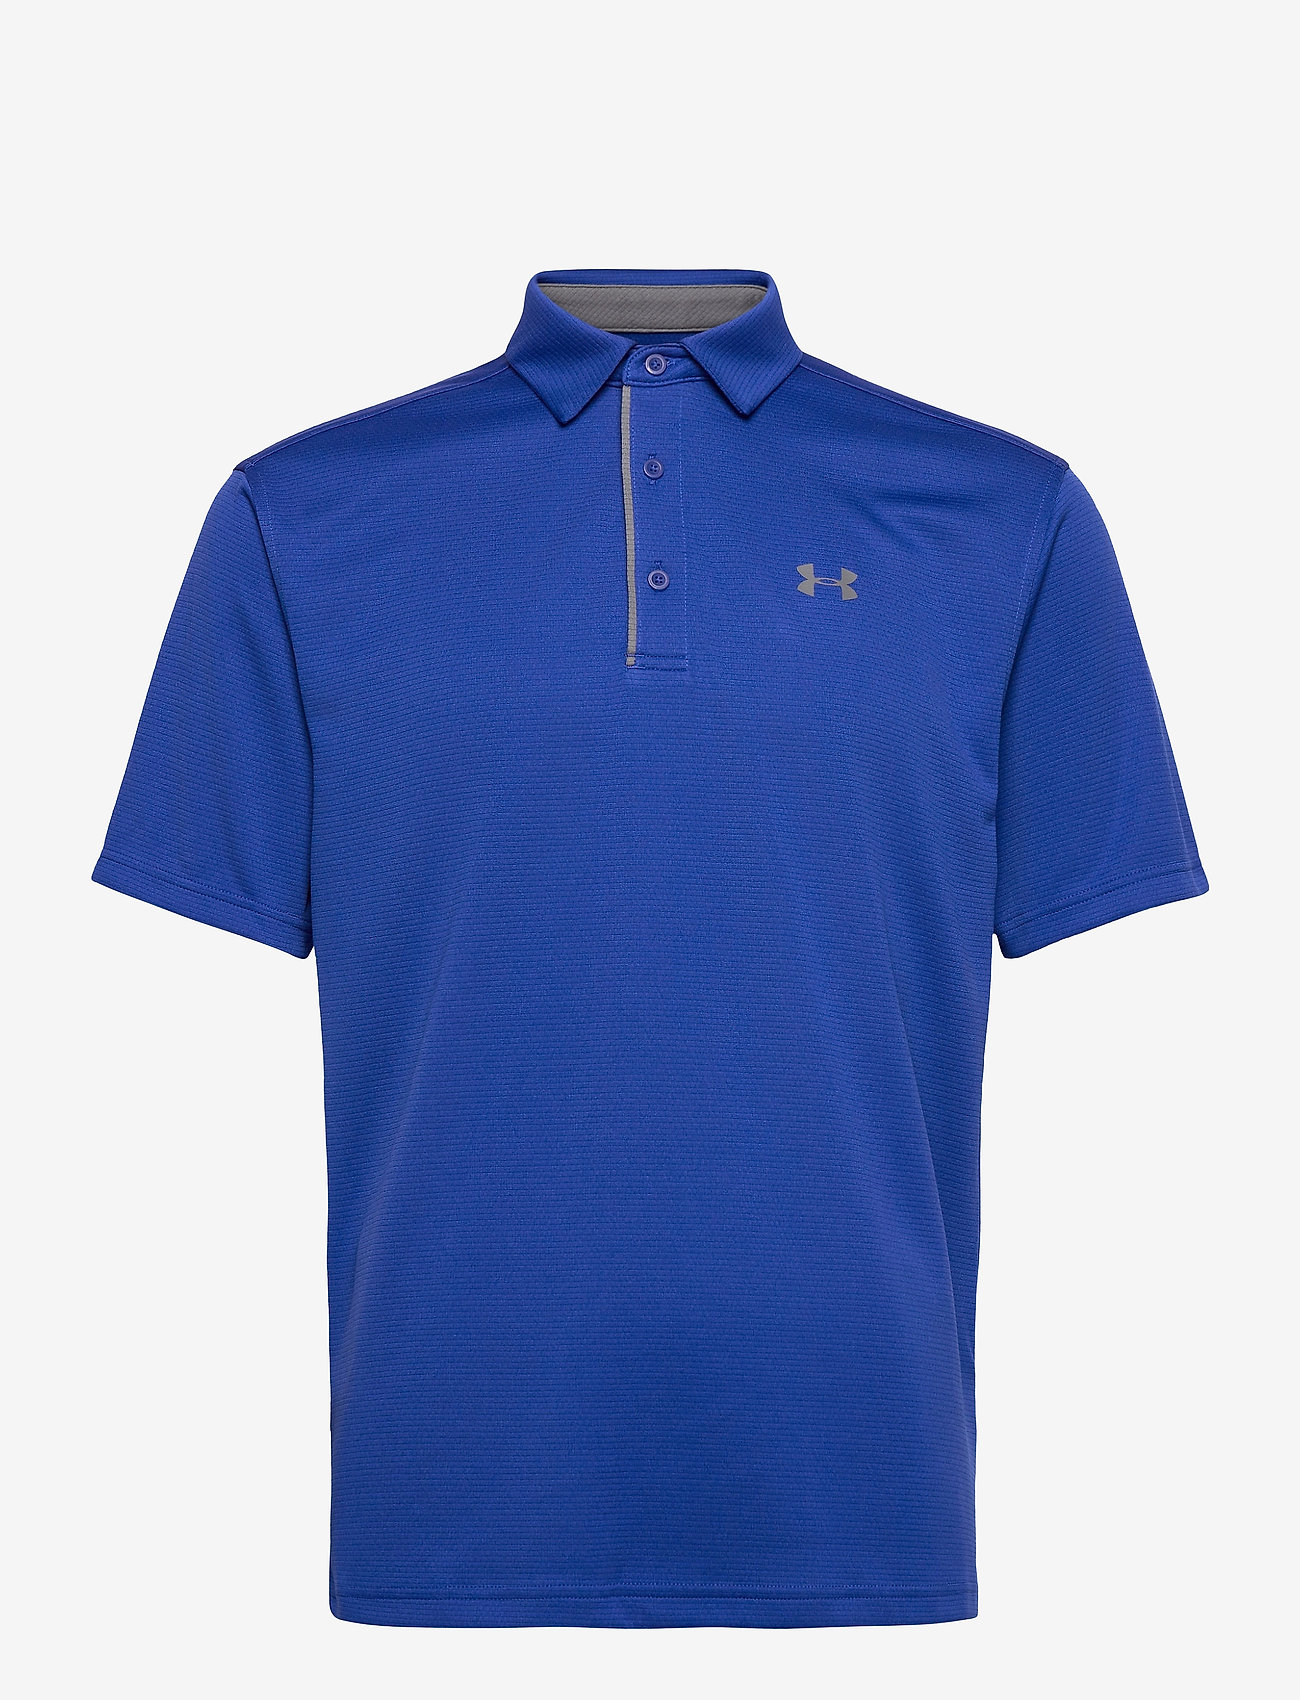 Under Armour - Tech Polo - toppe & t-shirts - royal - 1